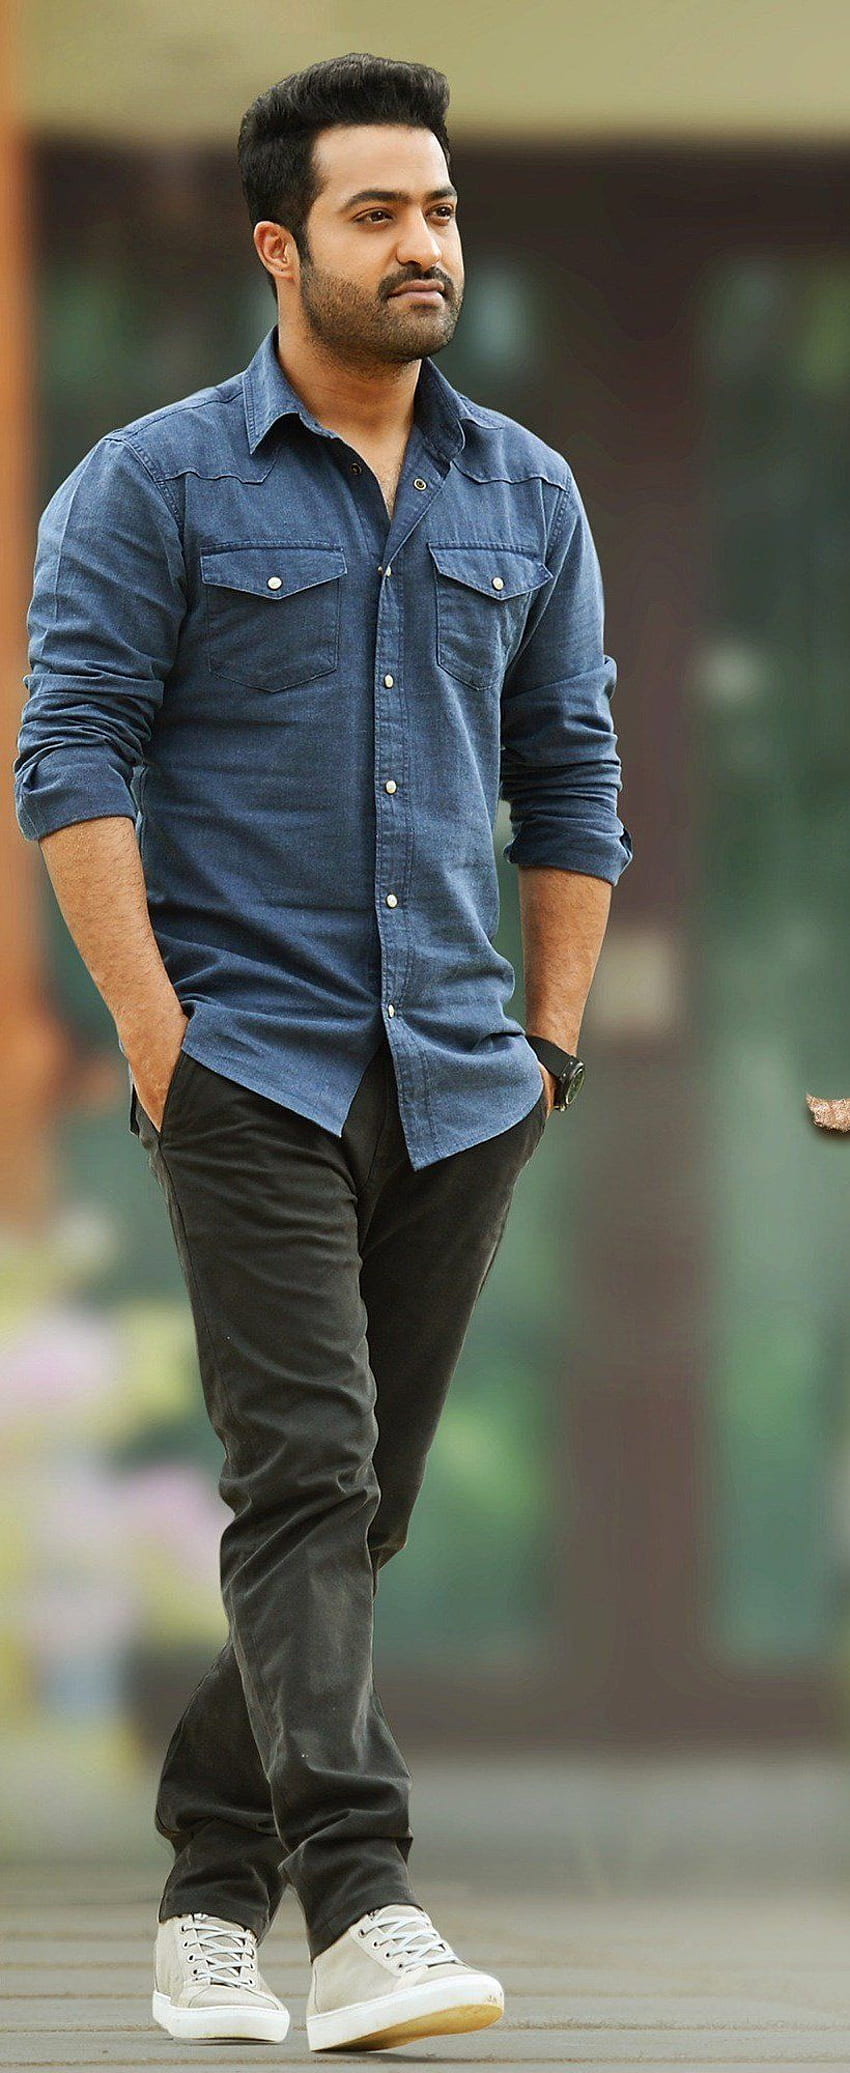 Top 89+ ntr new hairstyle hd images best - in.eteachers